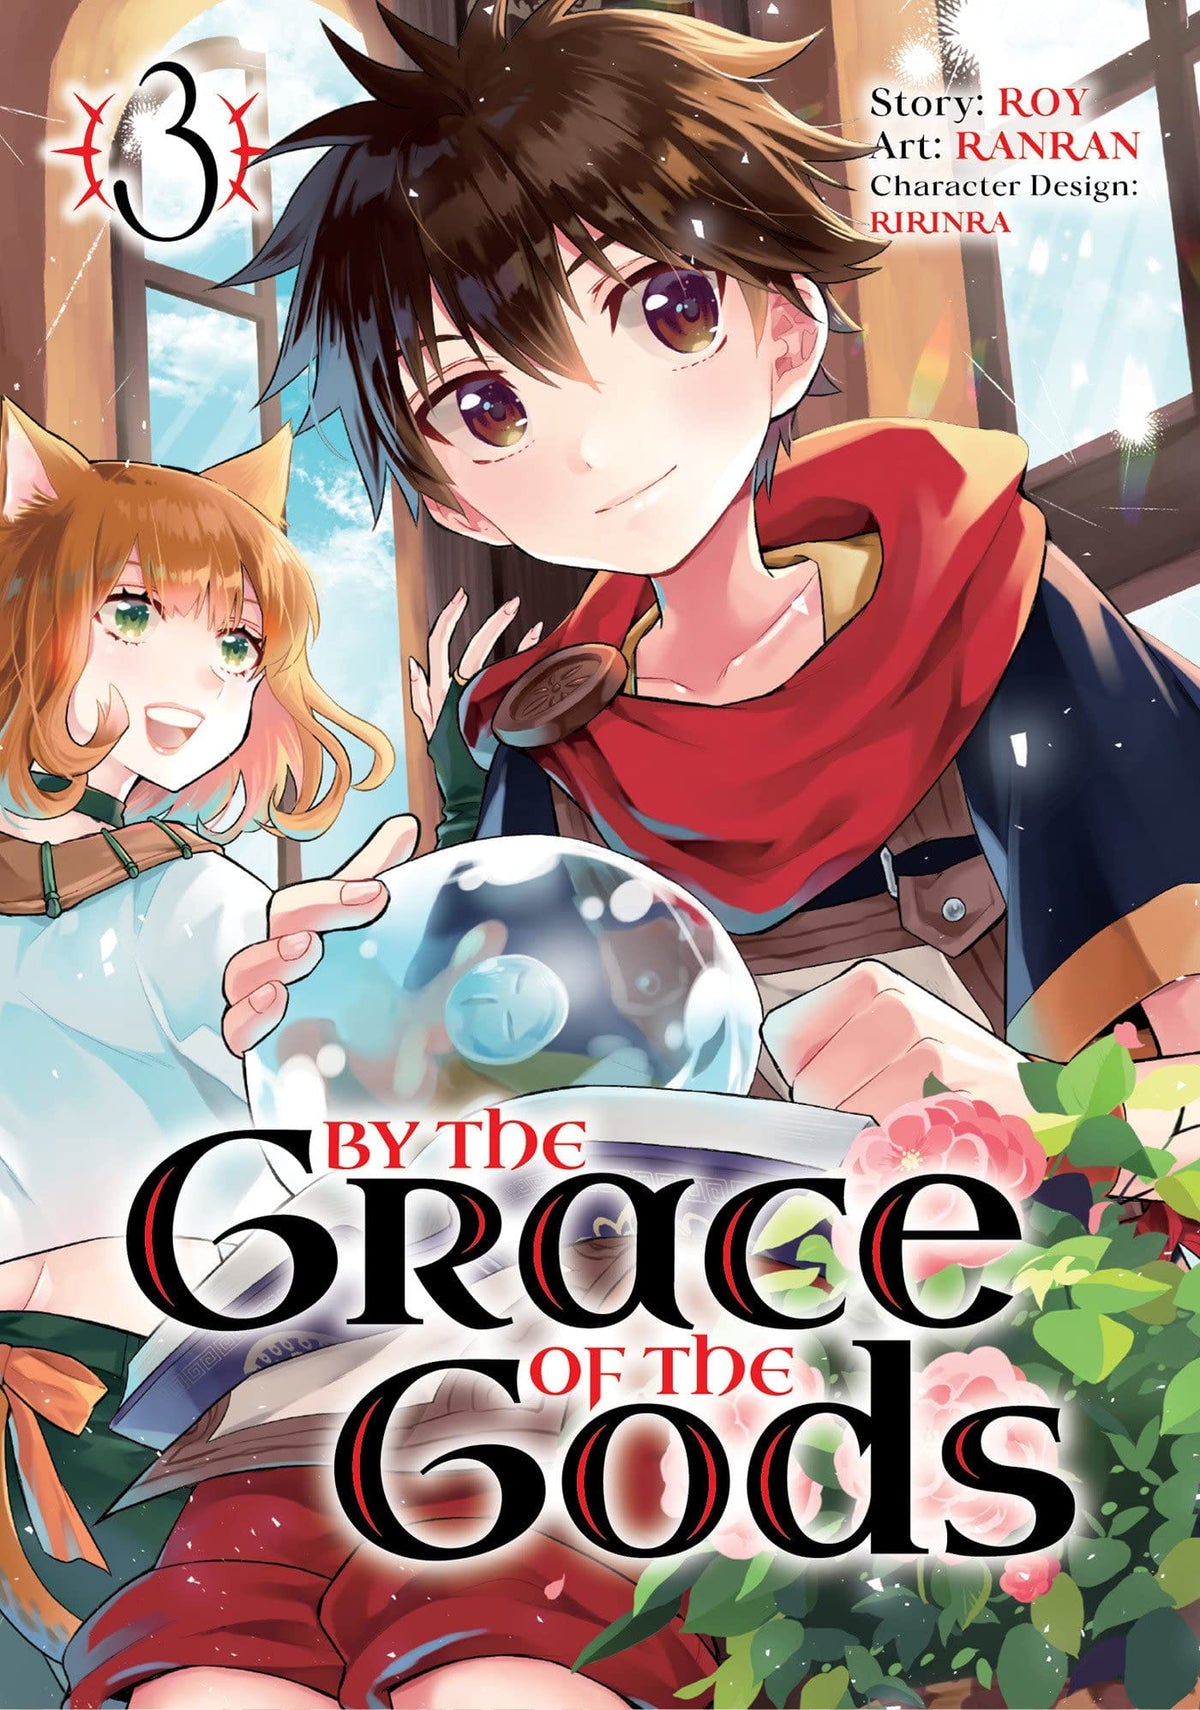 By the Grace of the Gods Vol. 3 - Third Eye